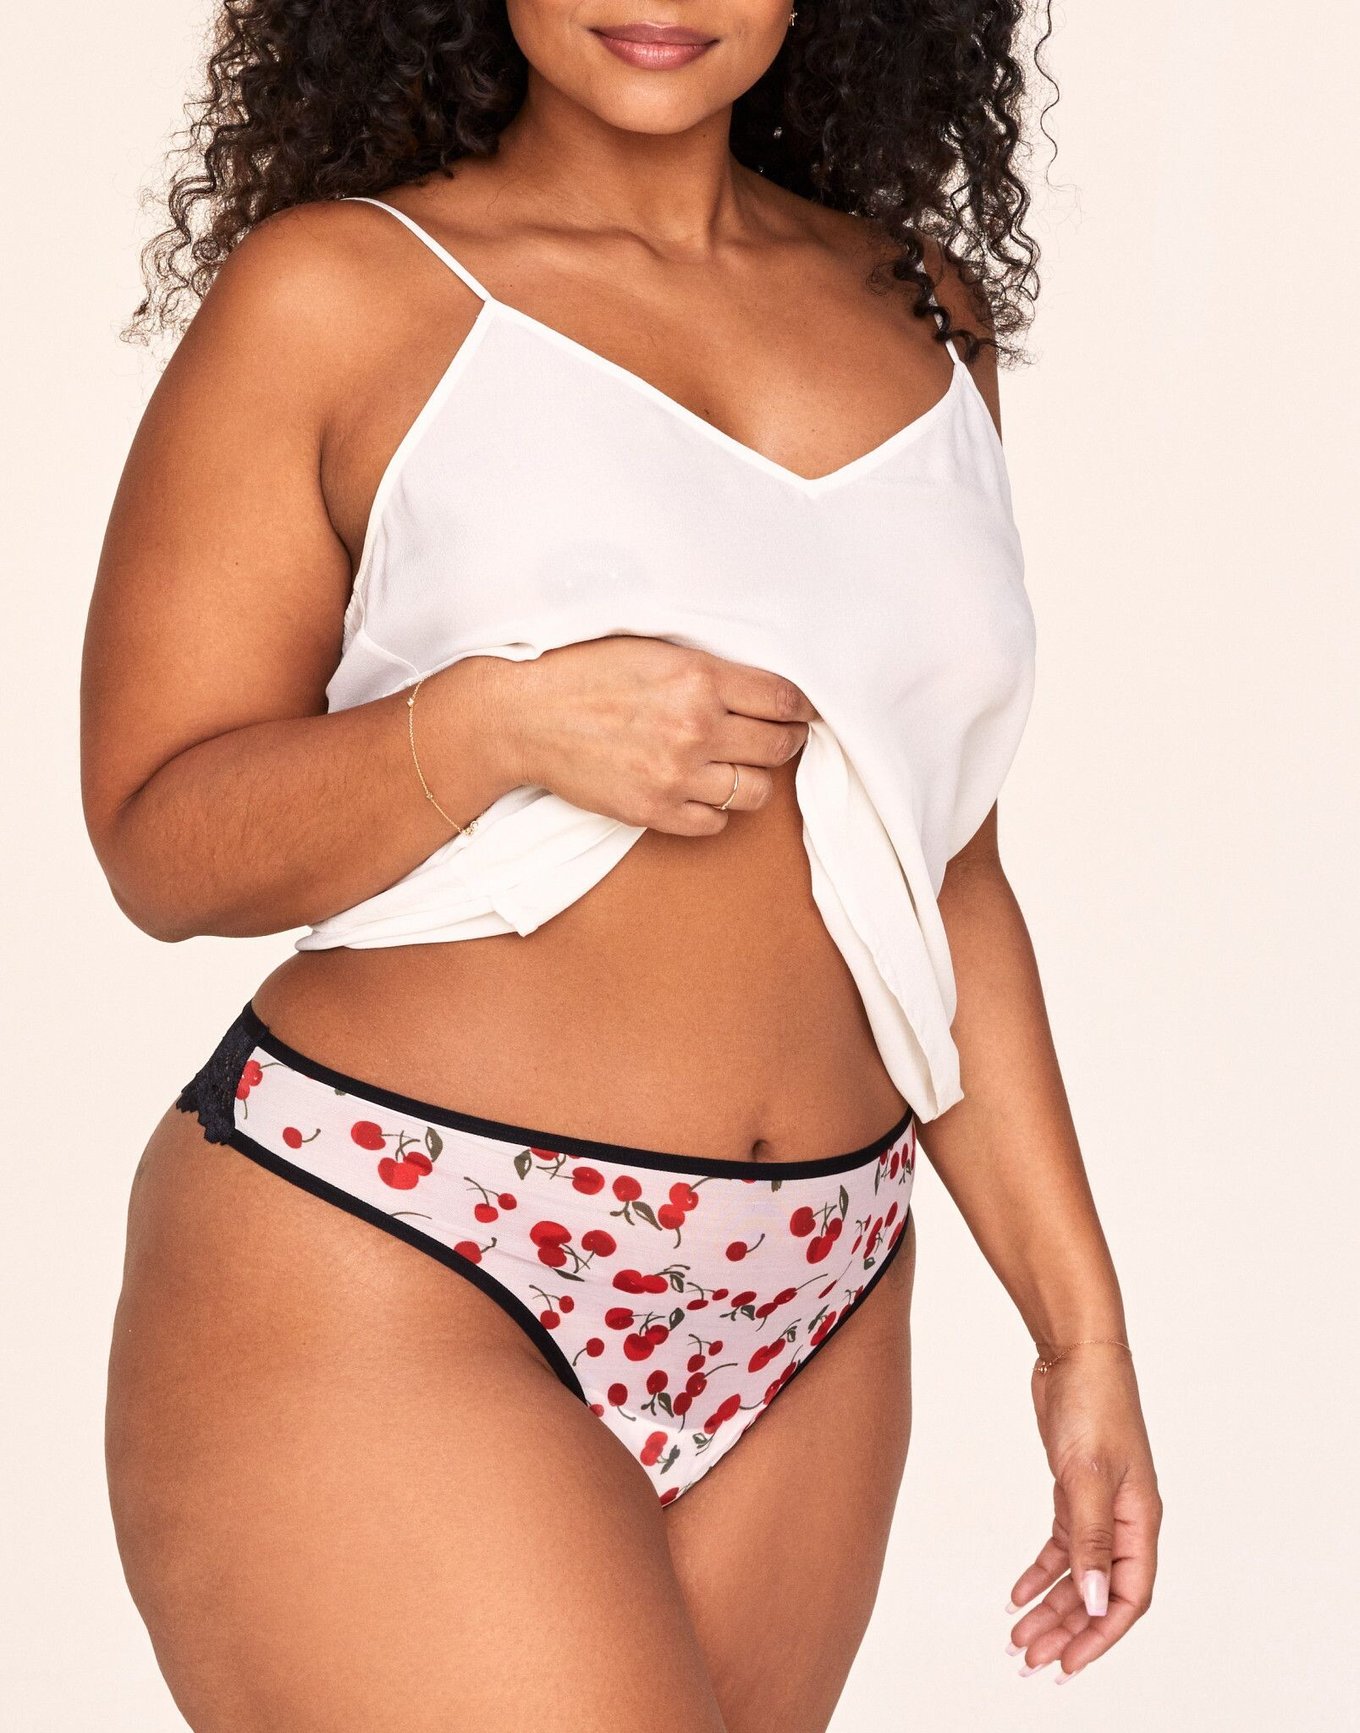 Has anyone tried this thong shaper? How uncomfortable was it? : r/torrid